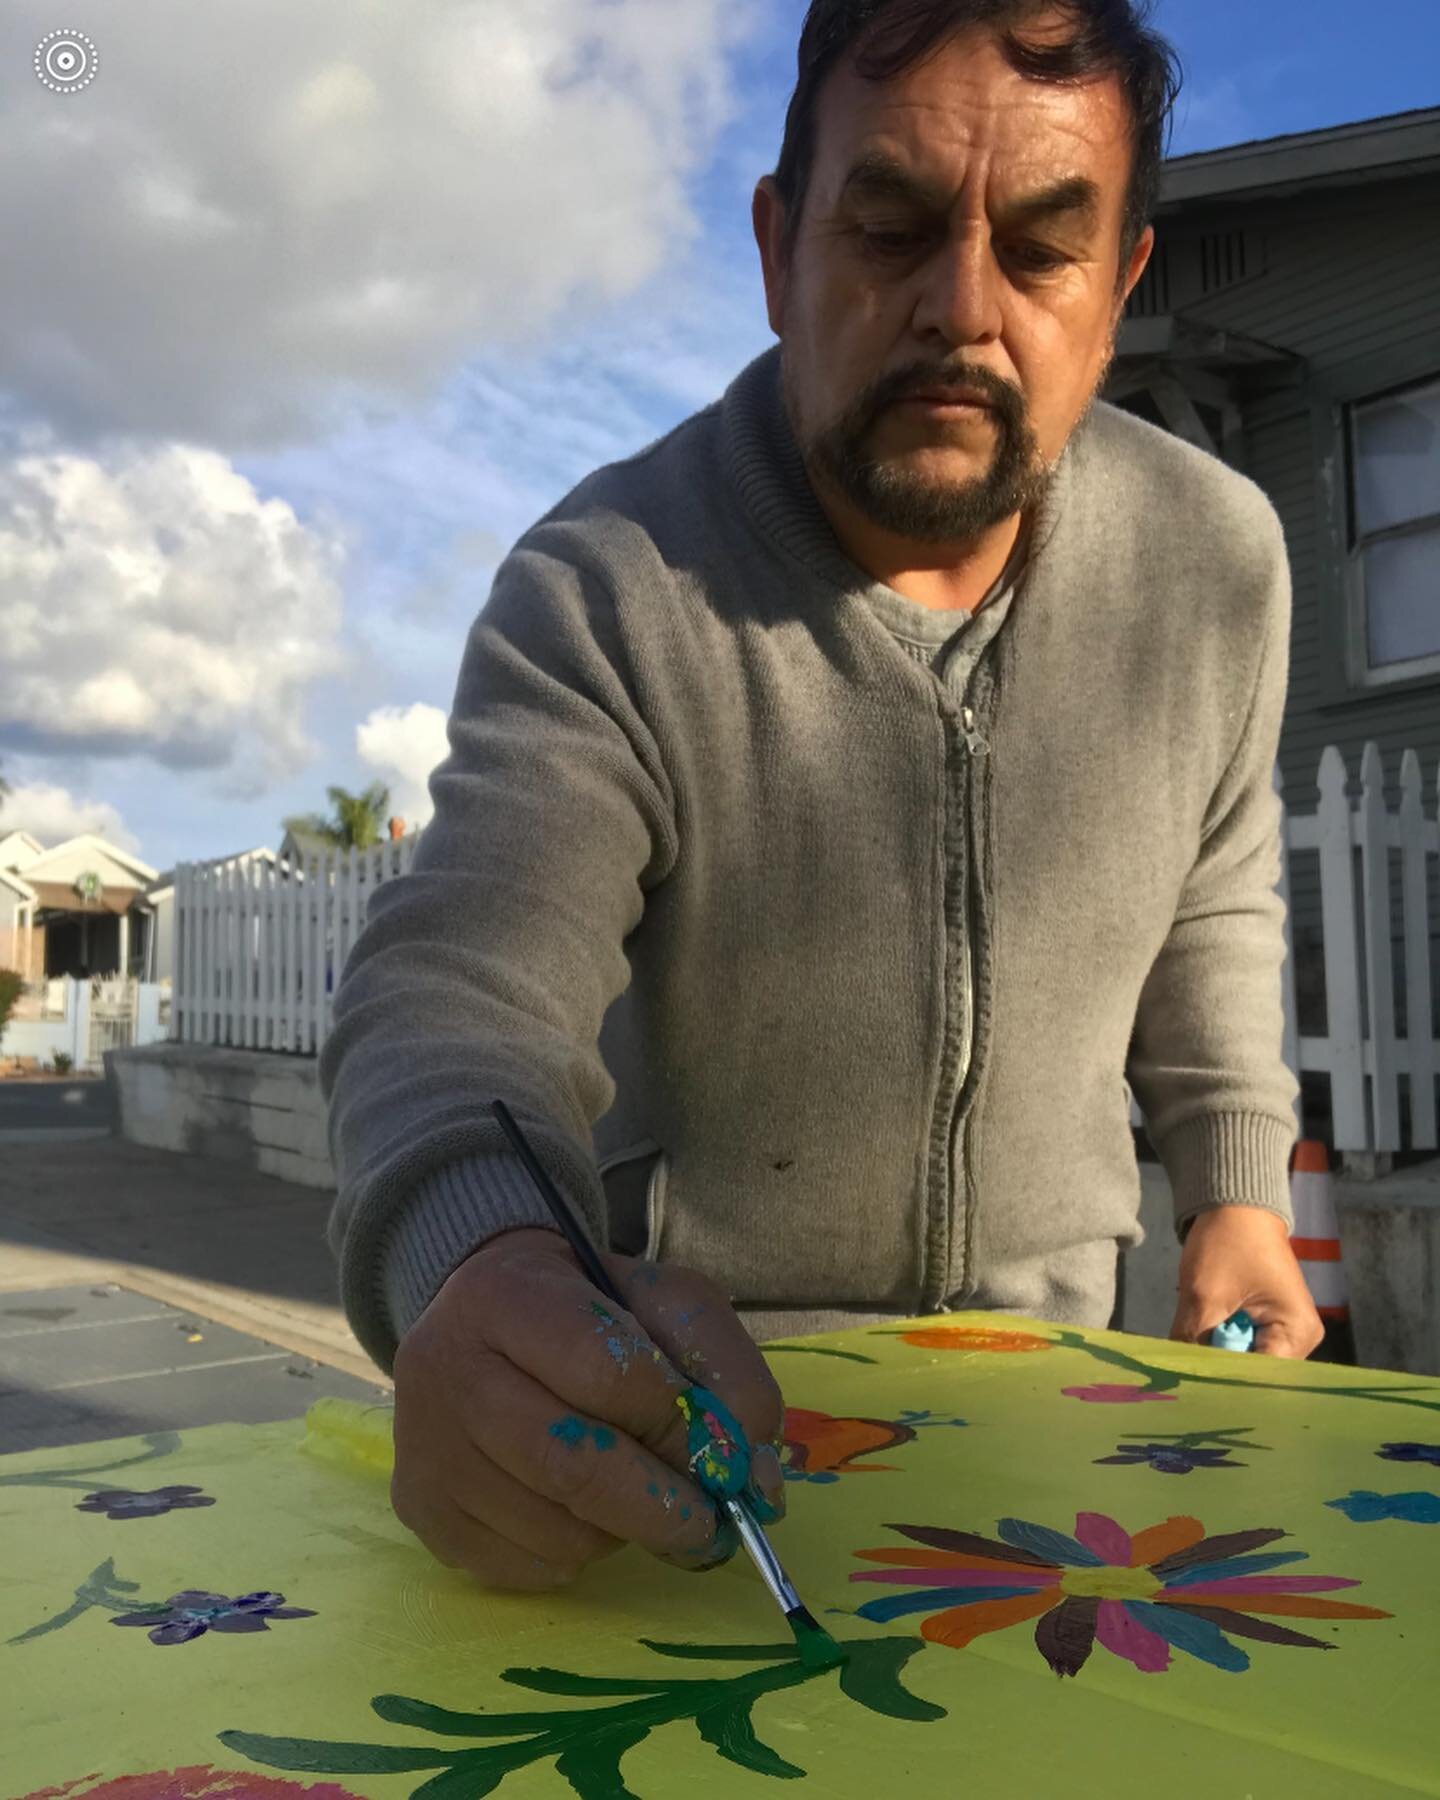 An artist at work! Rain or shine - Barrios Limpios - our neighborhood beautification program is on its way. With support from @sdge 12 electrical boxes are being painted along Market st. and Island Ave. Each box reflects the talent, creativity and co